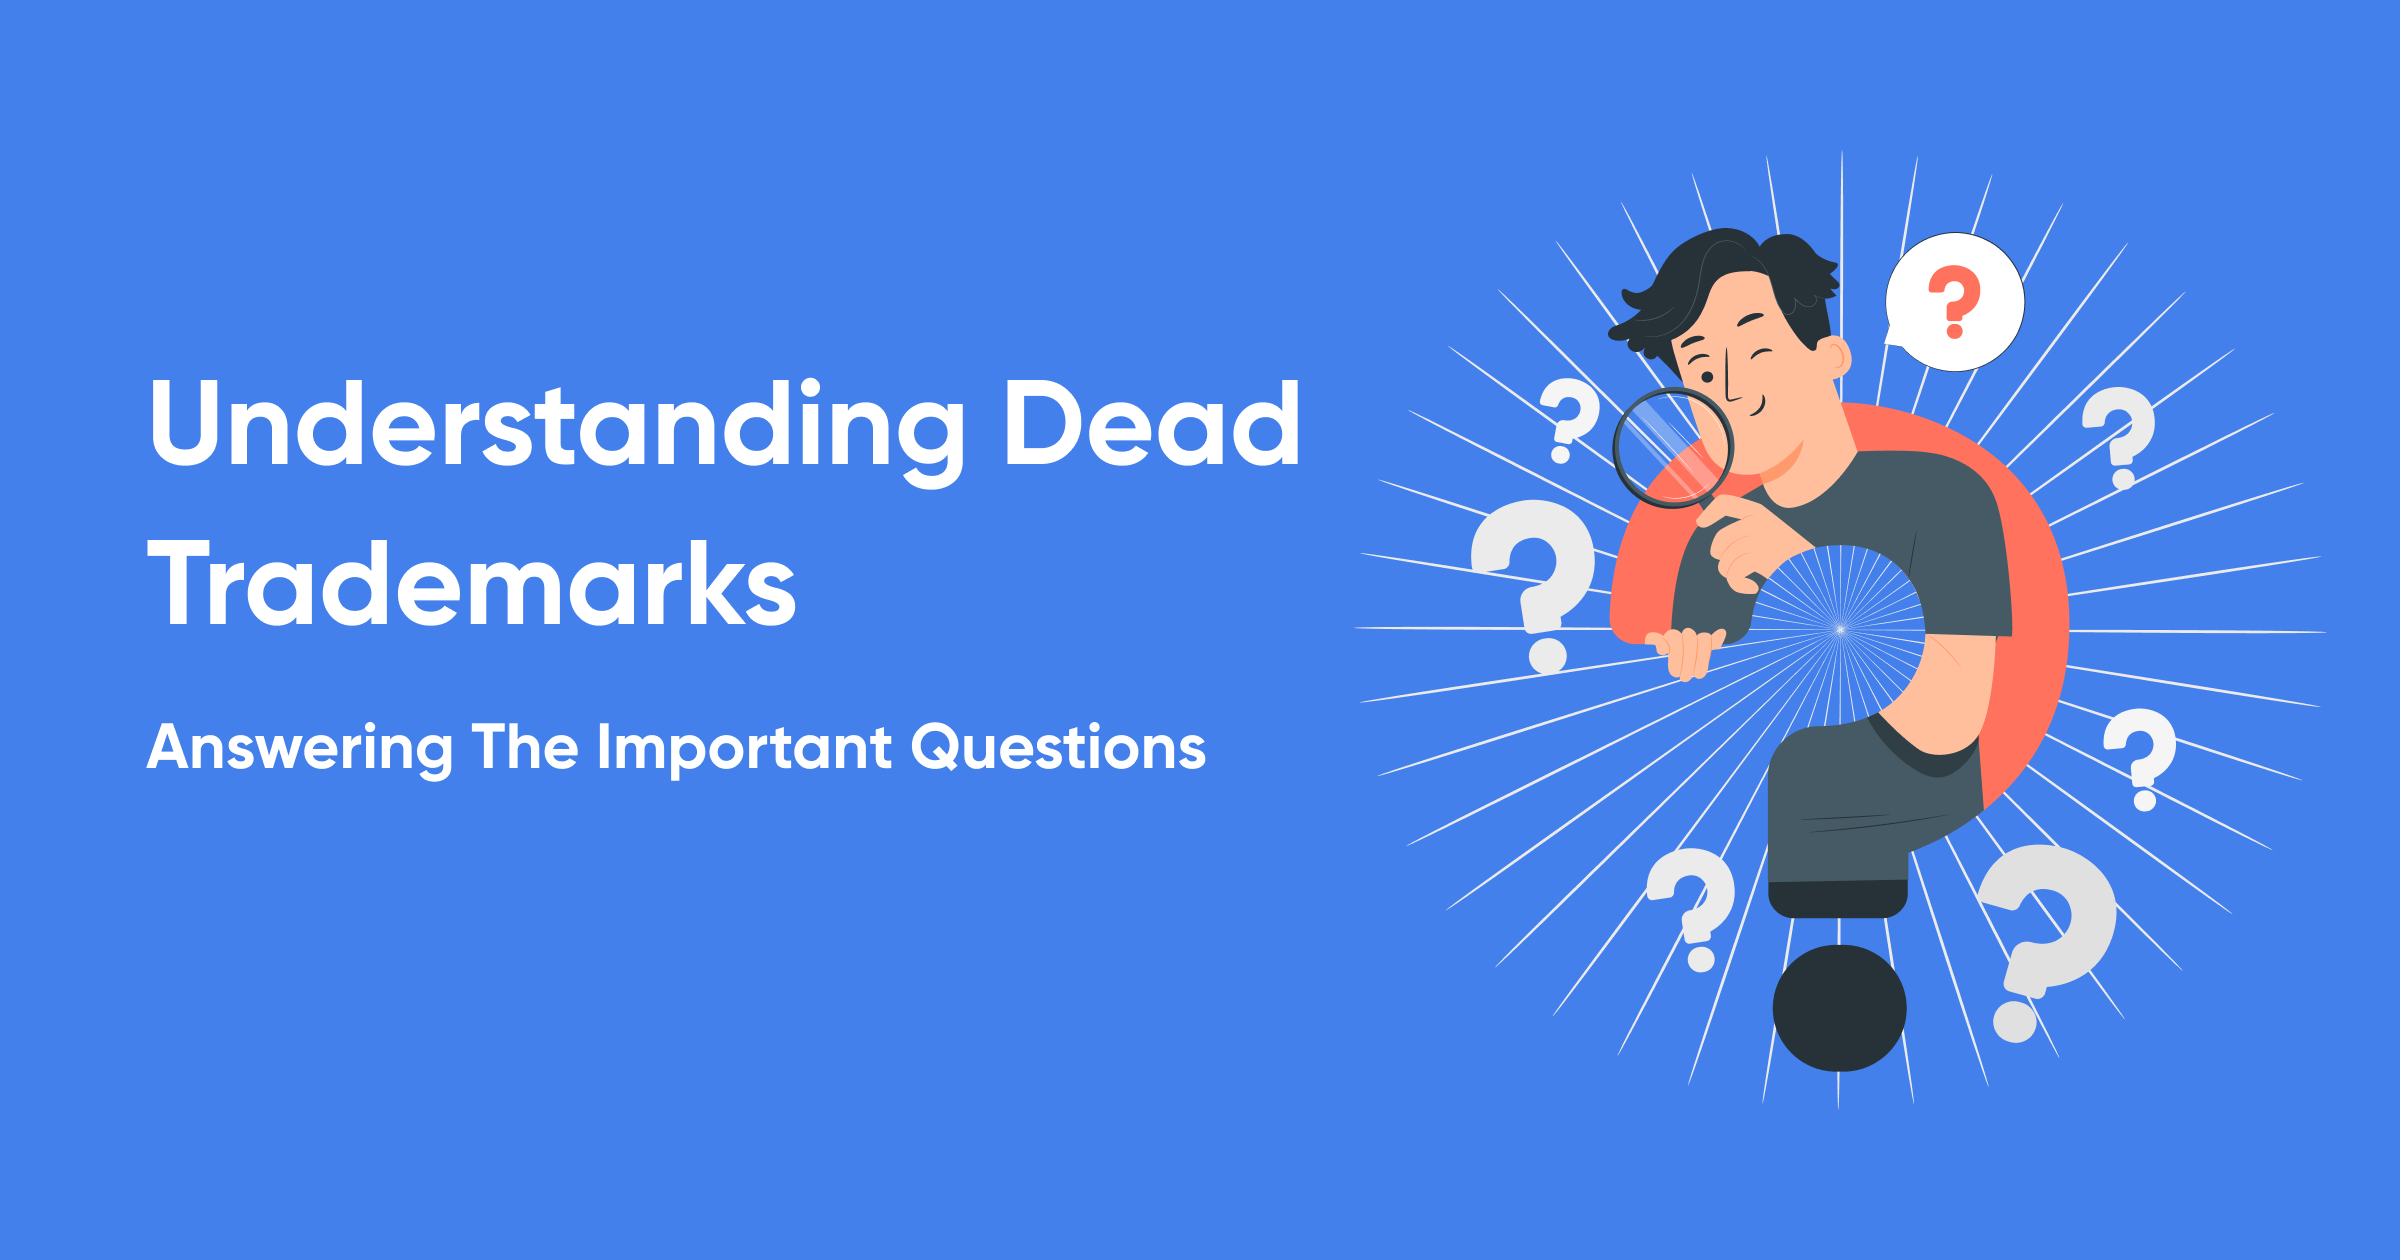 Understanding Dead Trademarks — Answering The Important Questions